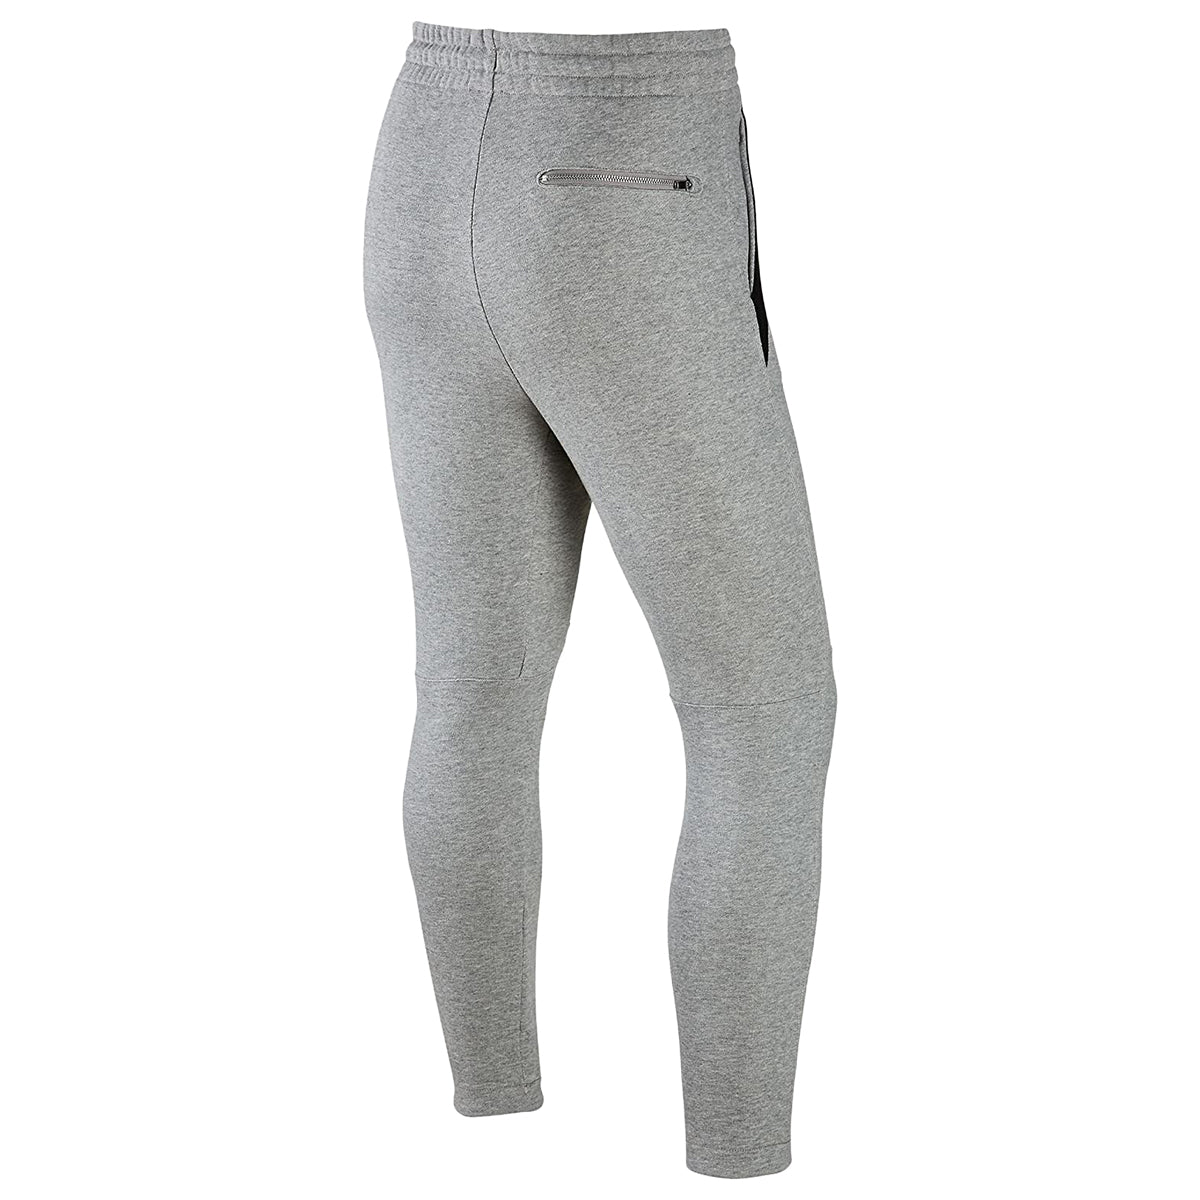 Nike Nsw Modern French Terry Cuff Pants Mens Style : 807920